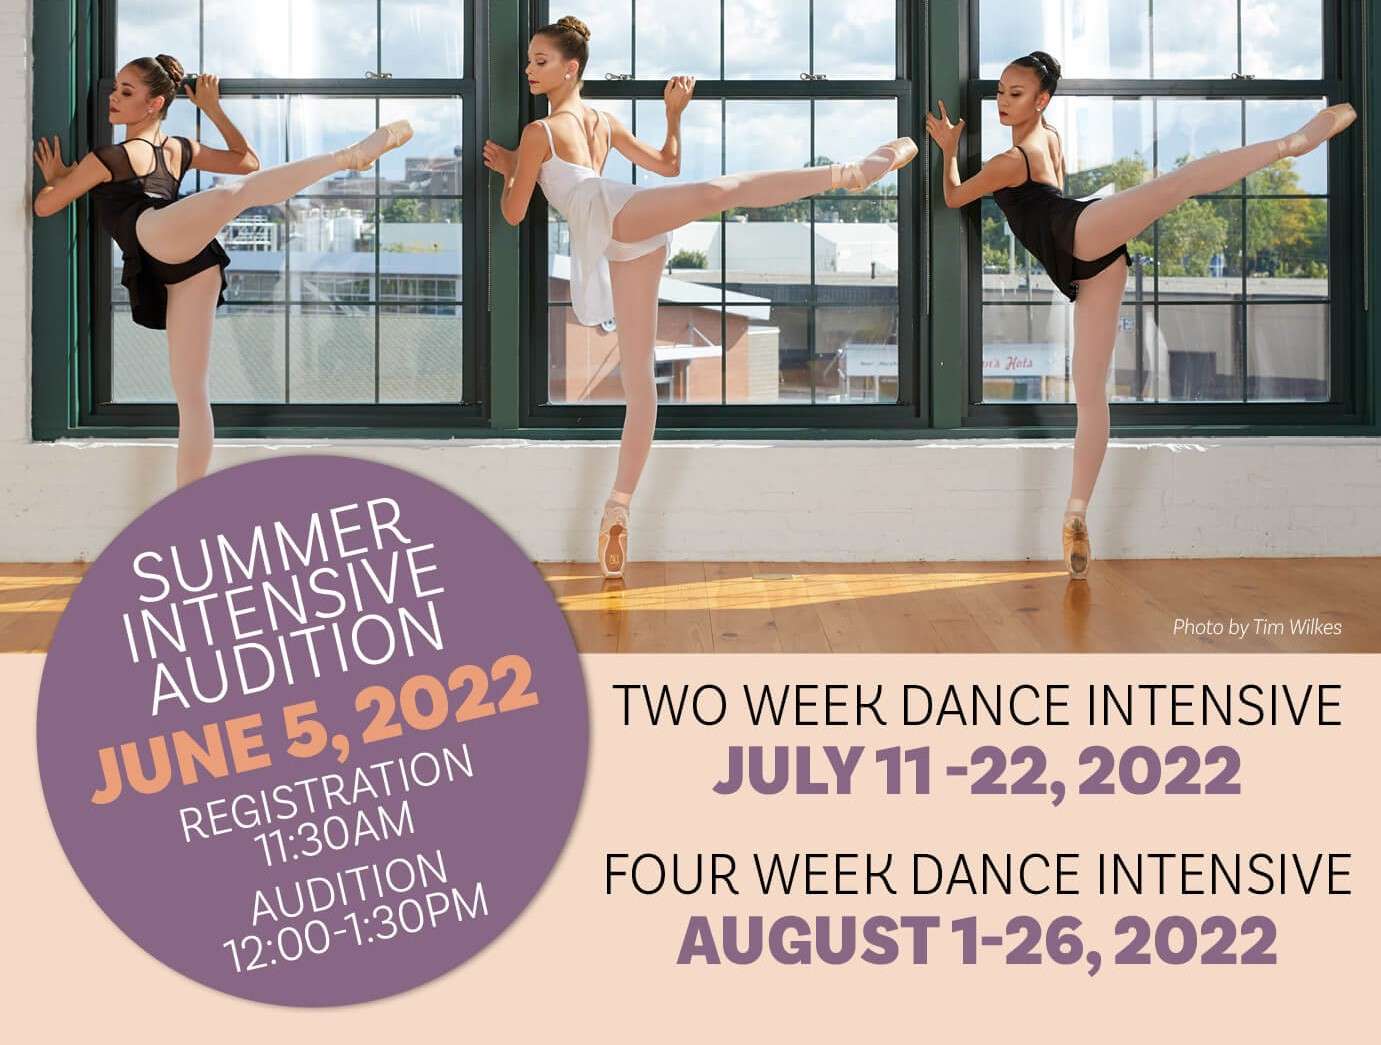 Summer Intensive Auditions